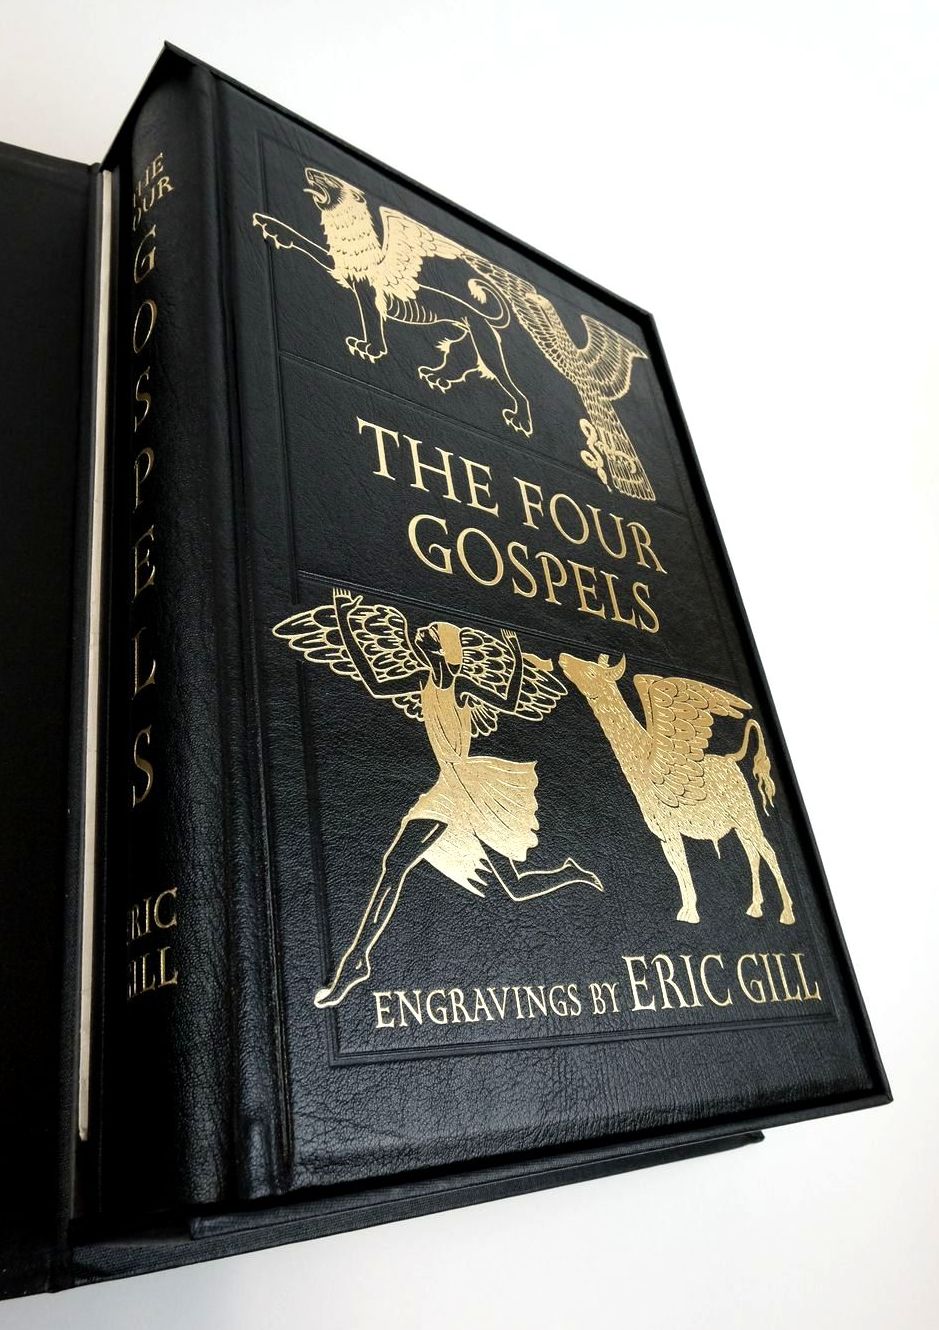 Photo of THE FOUR GOSPELS OF THE LORD JESUS CHRIST written by Dreyfus, John Gibbings, Robert illustrated by Gill, Eric published by Folio Society, The Golden Cockerel Press (STOCK CODE: 1822492)  for sale by Stella & Rose's Books